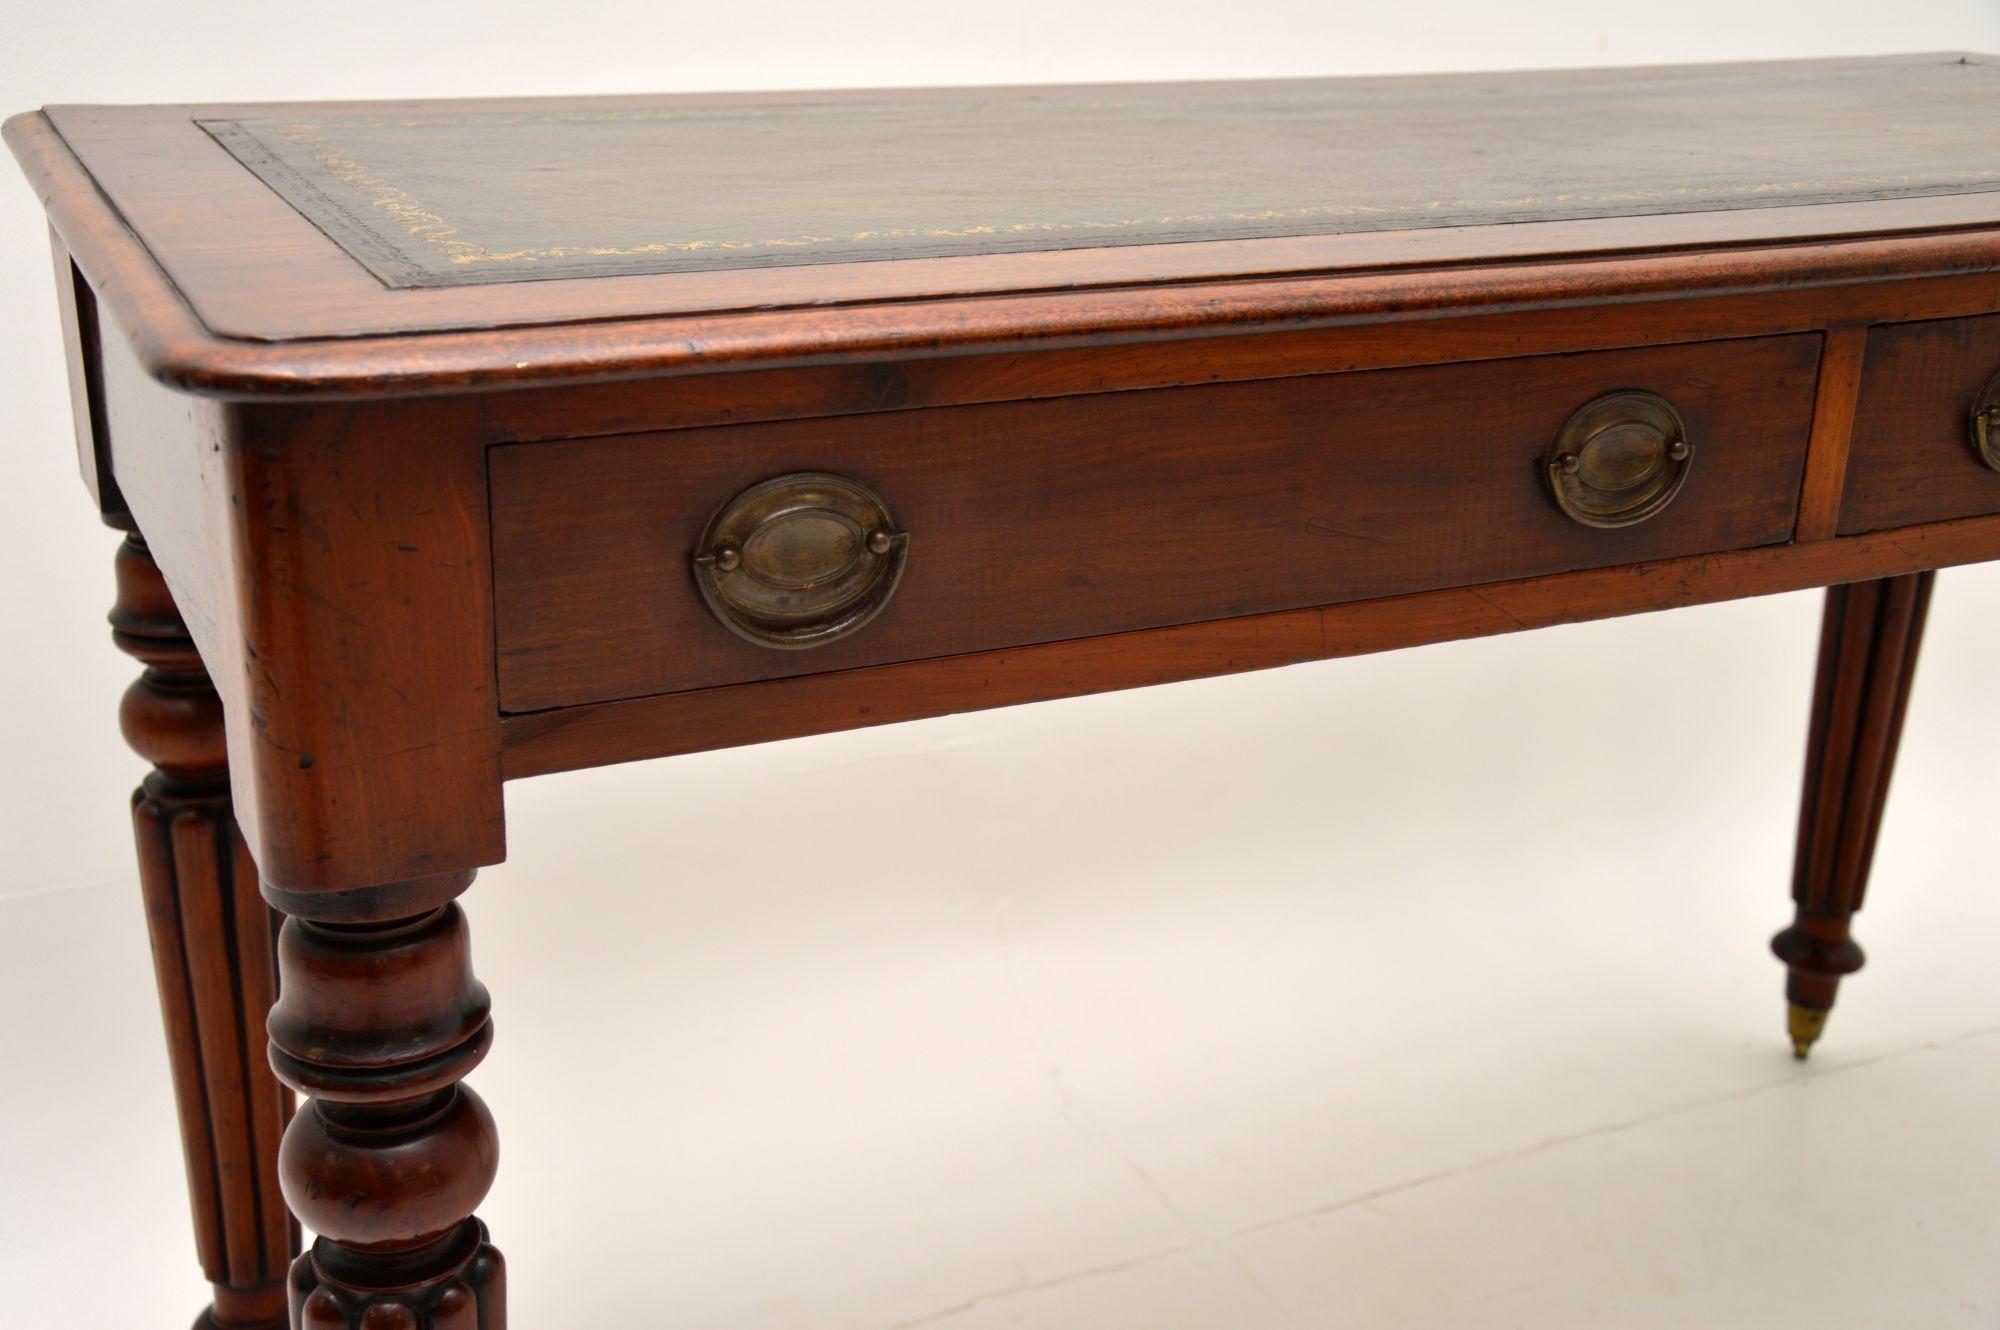 English Antique William IV Mahogany Leather Top Writing Table or Desk